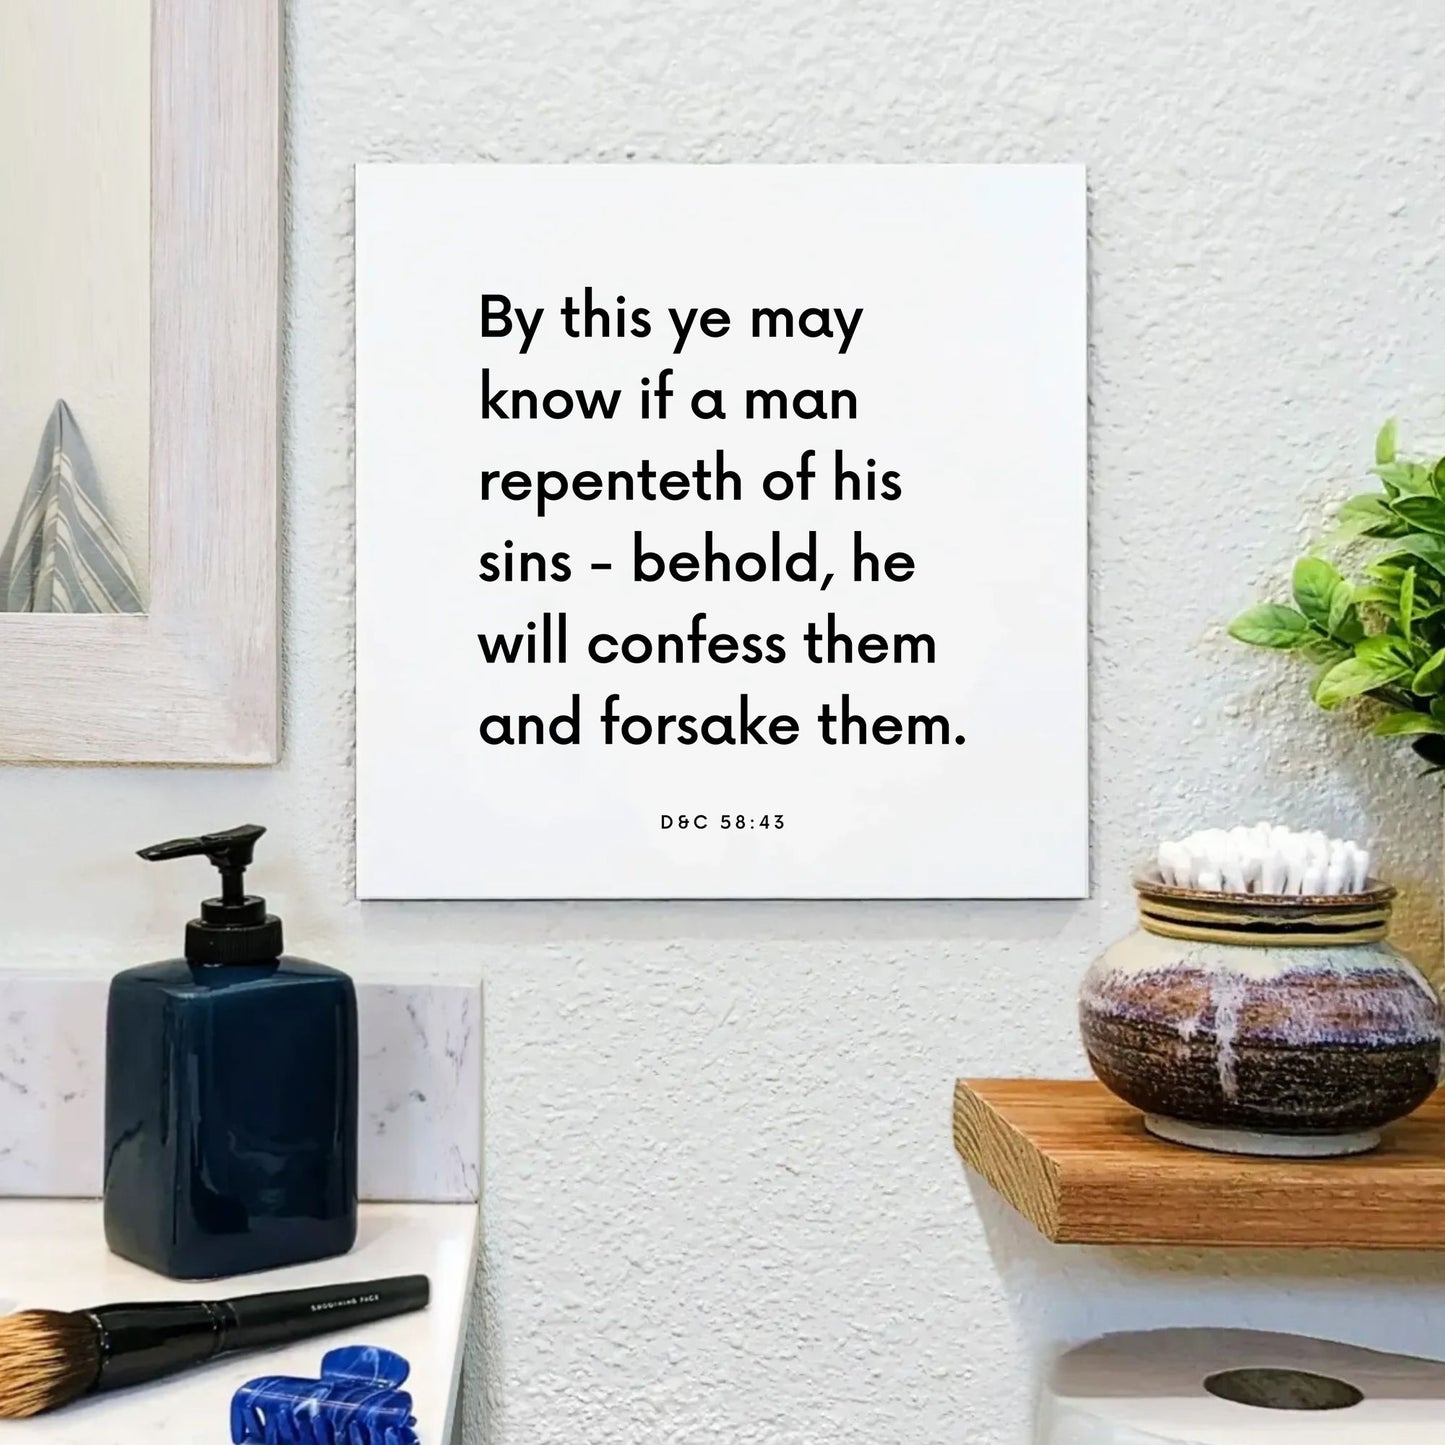 Bathroom mouting of the scripture tile for D&C 58:43 - "By this ye may know if a man repenteth of his sins"